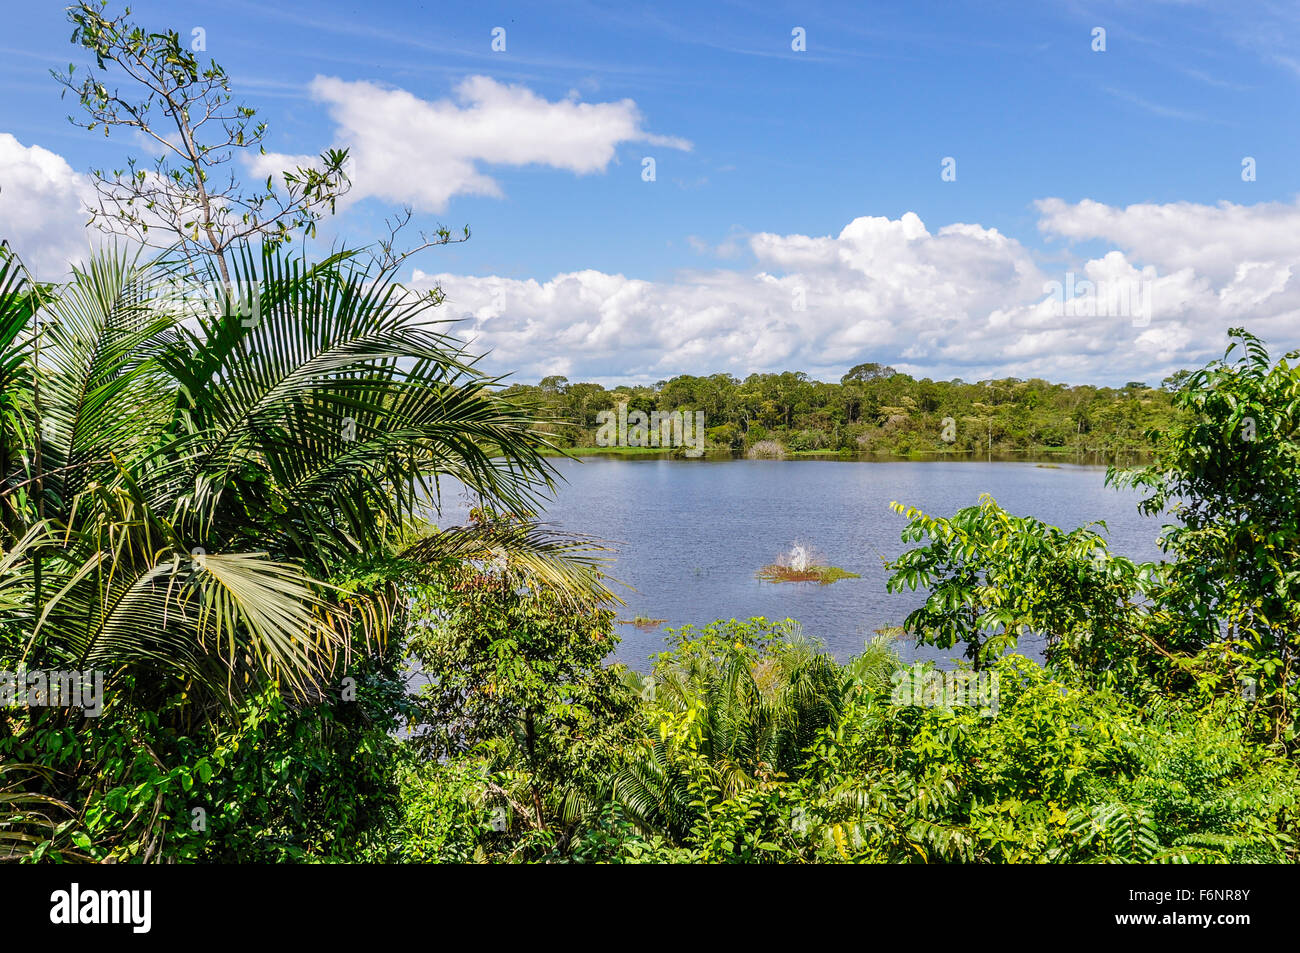 View of the lake in the Amazon Rainforest, close to Manaus, Brazil Stock Photo